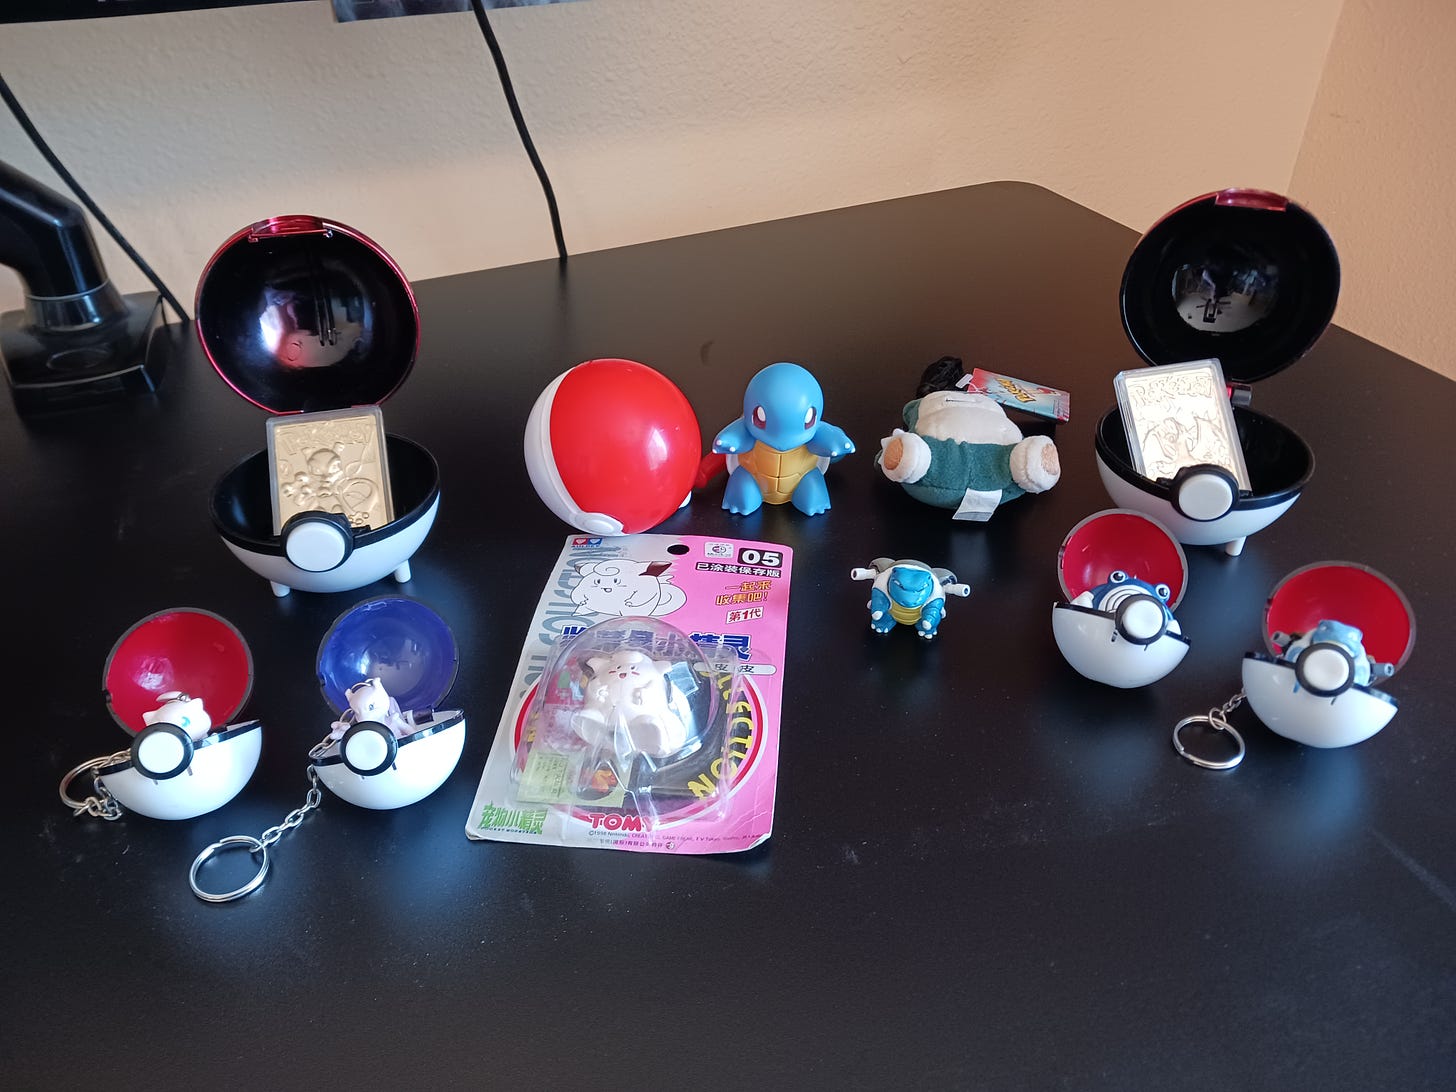 A selection of random Pokémon toys, including some gold-plated Pokémon cards from Burger King